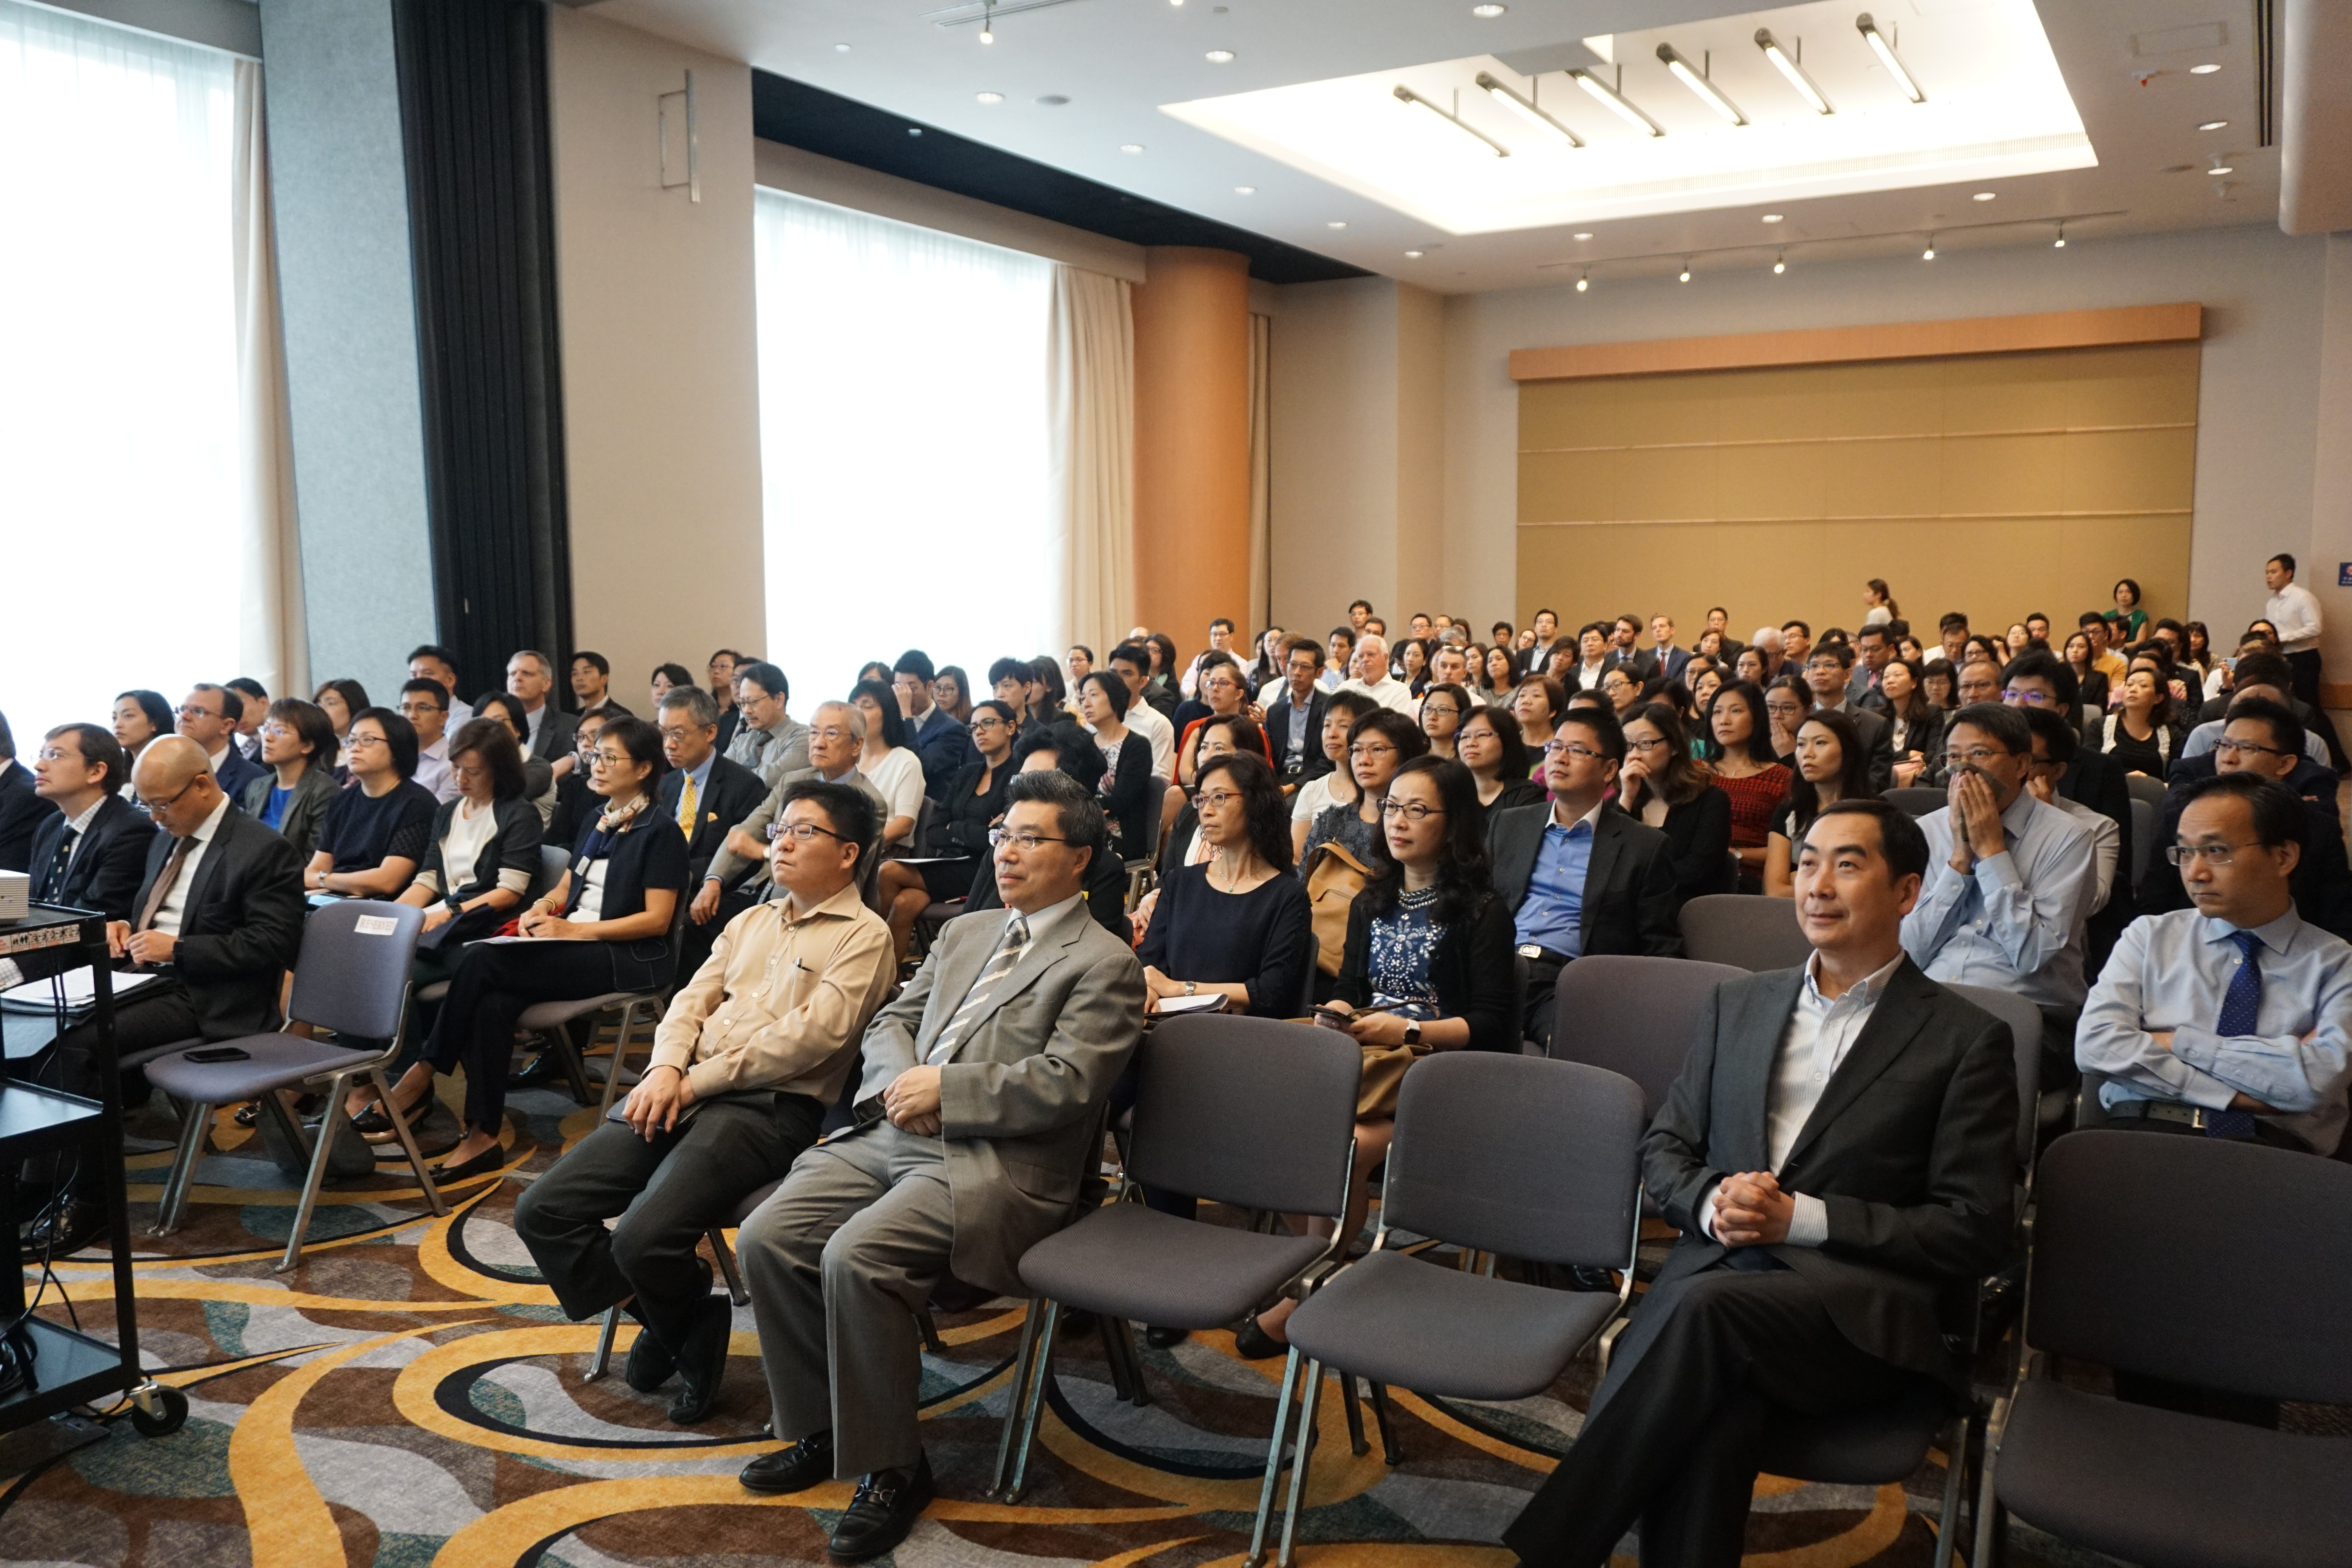 Seminar on the English Insurance Act 2015 and how this may impact on the Insurance Industry in Hong Kong